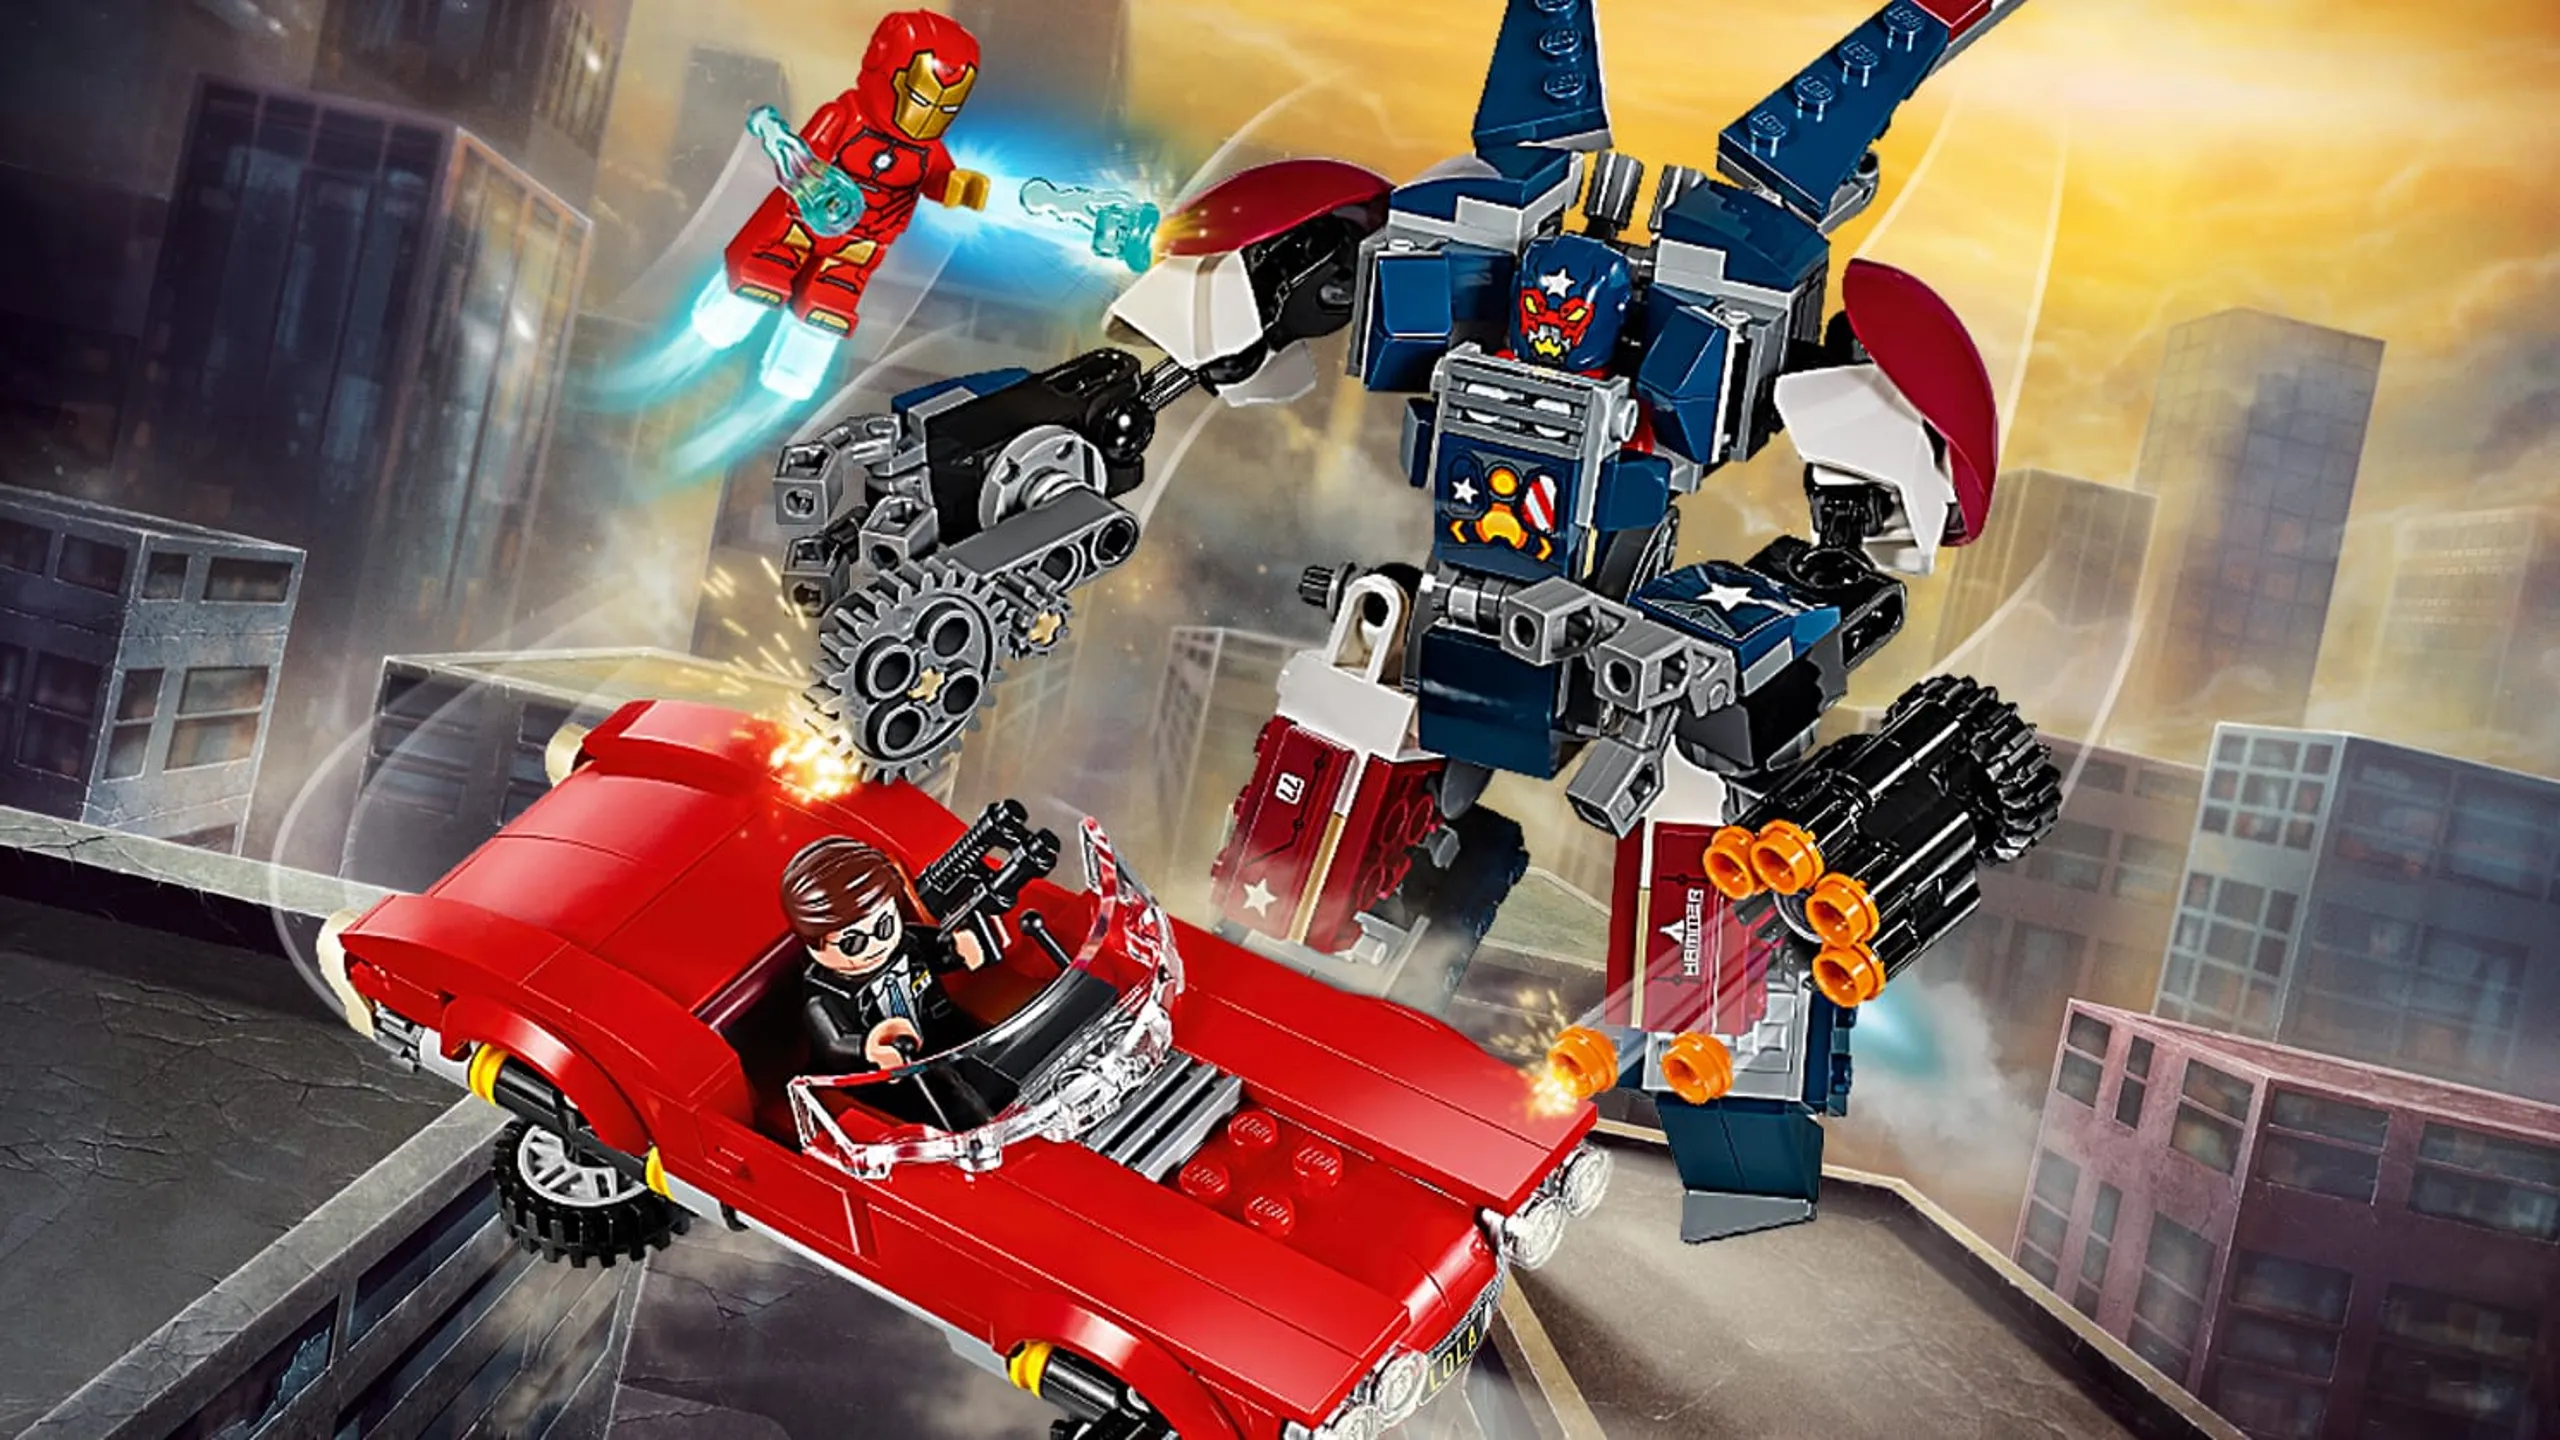 LEGO Super Heroes - 76077 Iron Man: Detroit Steel Strikes - Justin Hammer attacks Agent Coulson, who tries to escape Justin Hammer's stud shoots and chainsaw arms in his flying car.